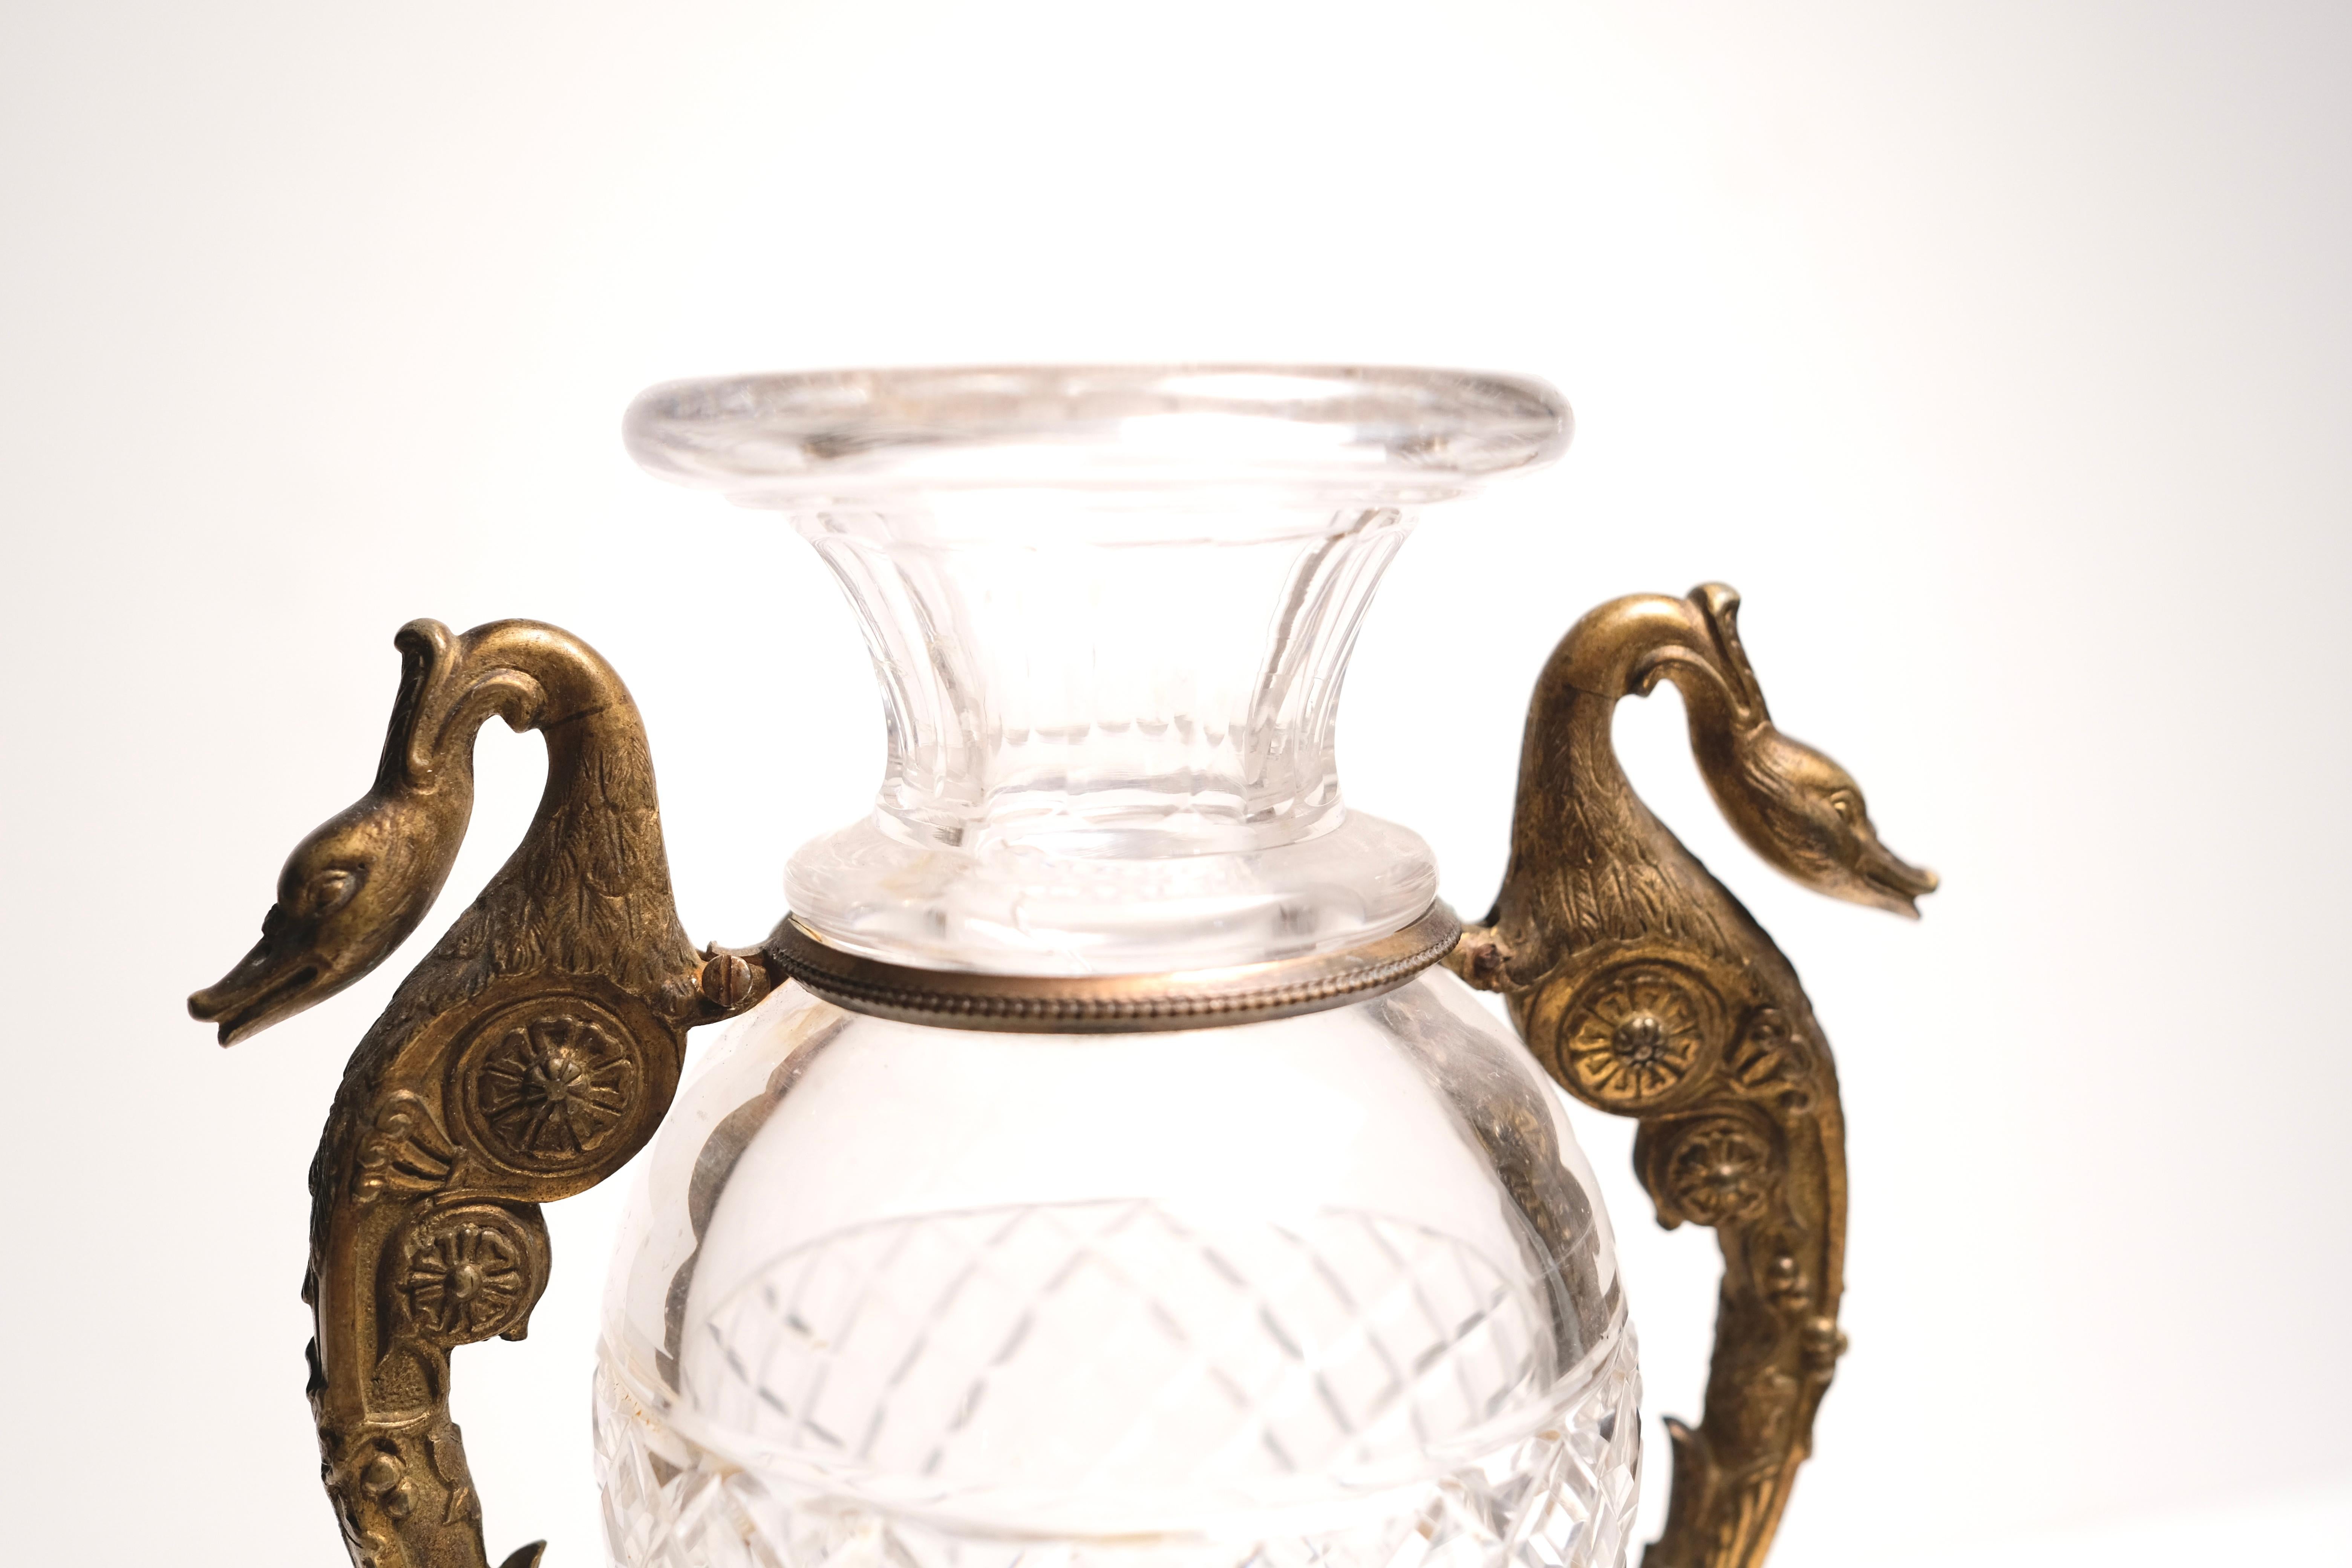 Cut crystal. Bronze mounted. Swan motif. Finely chased. Measure: Base is 3.5